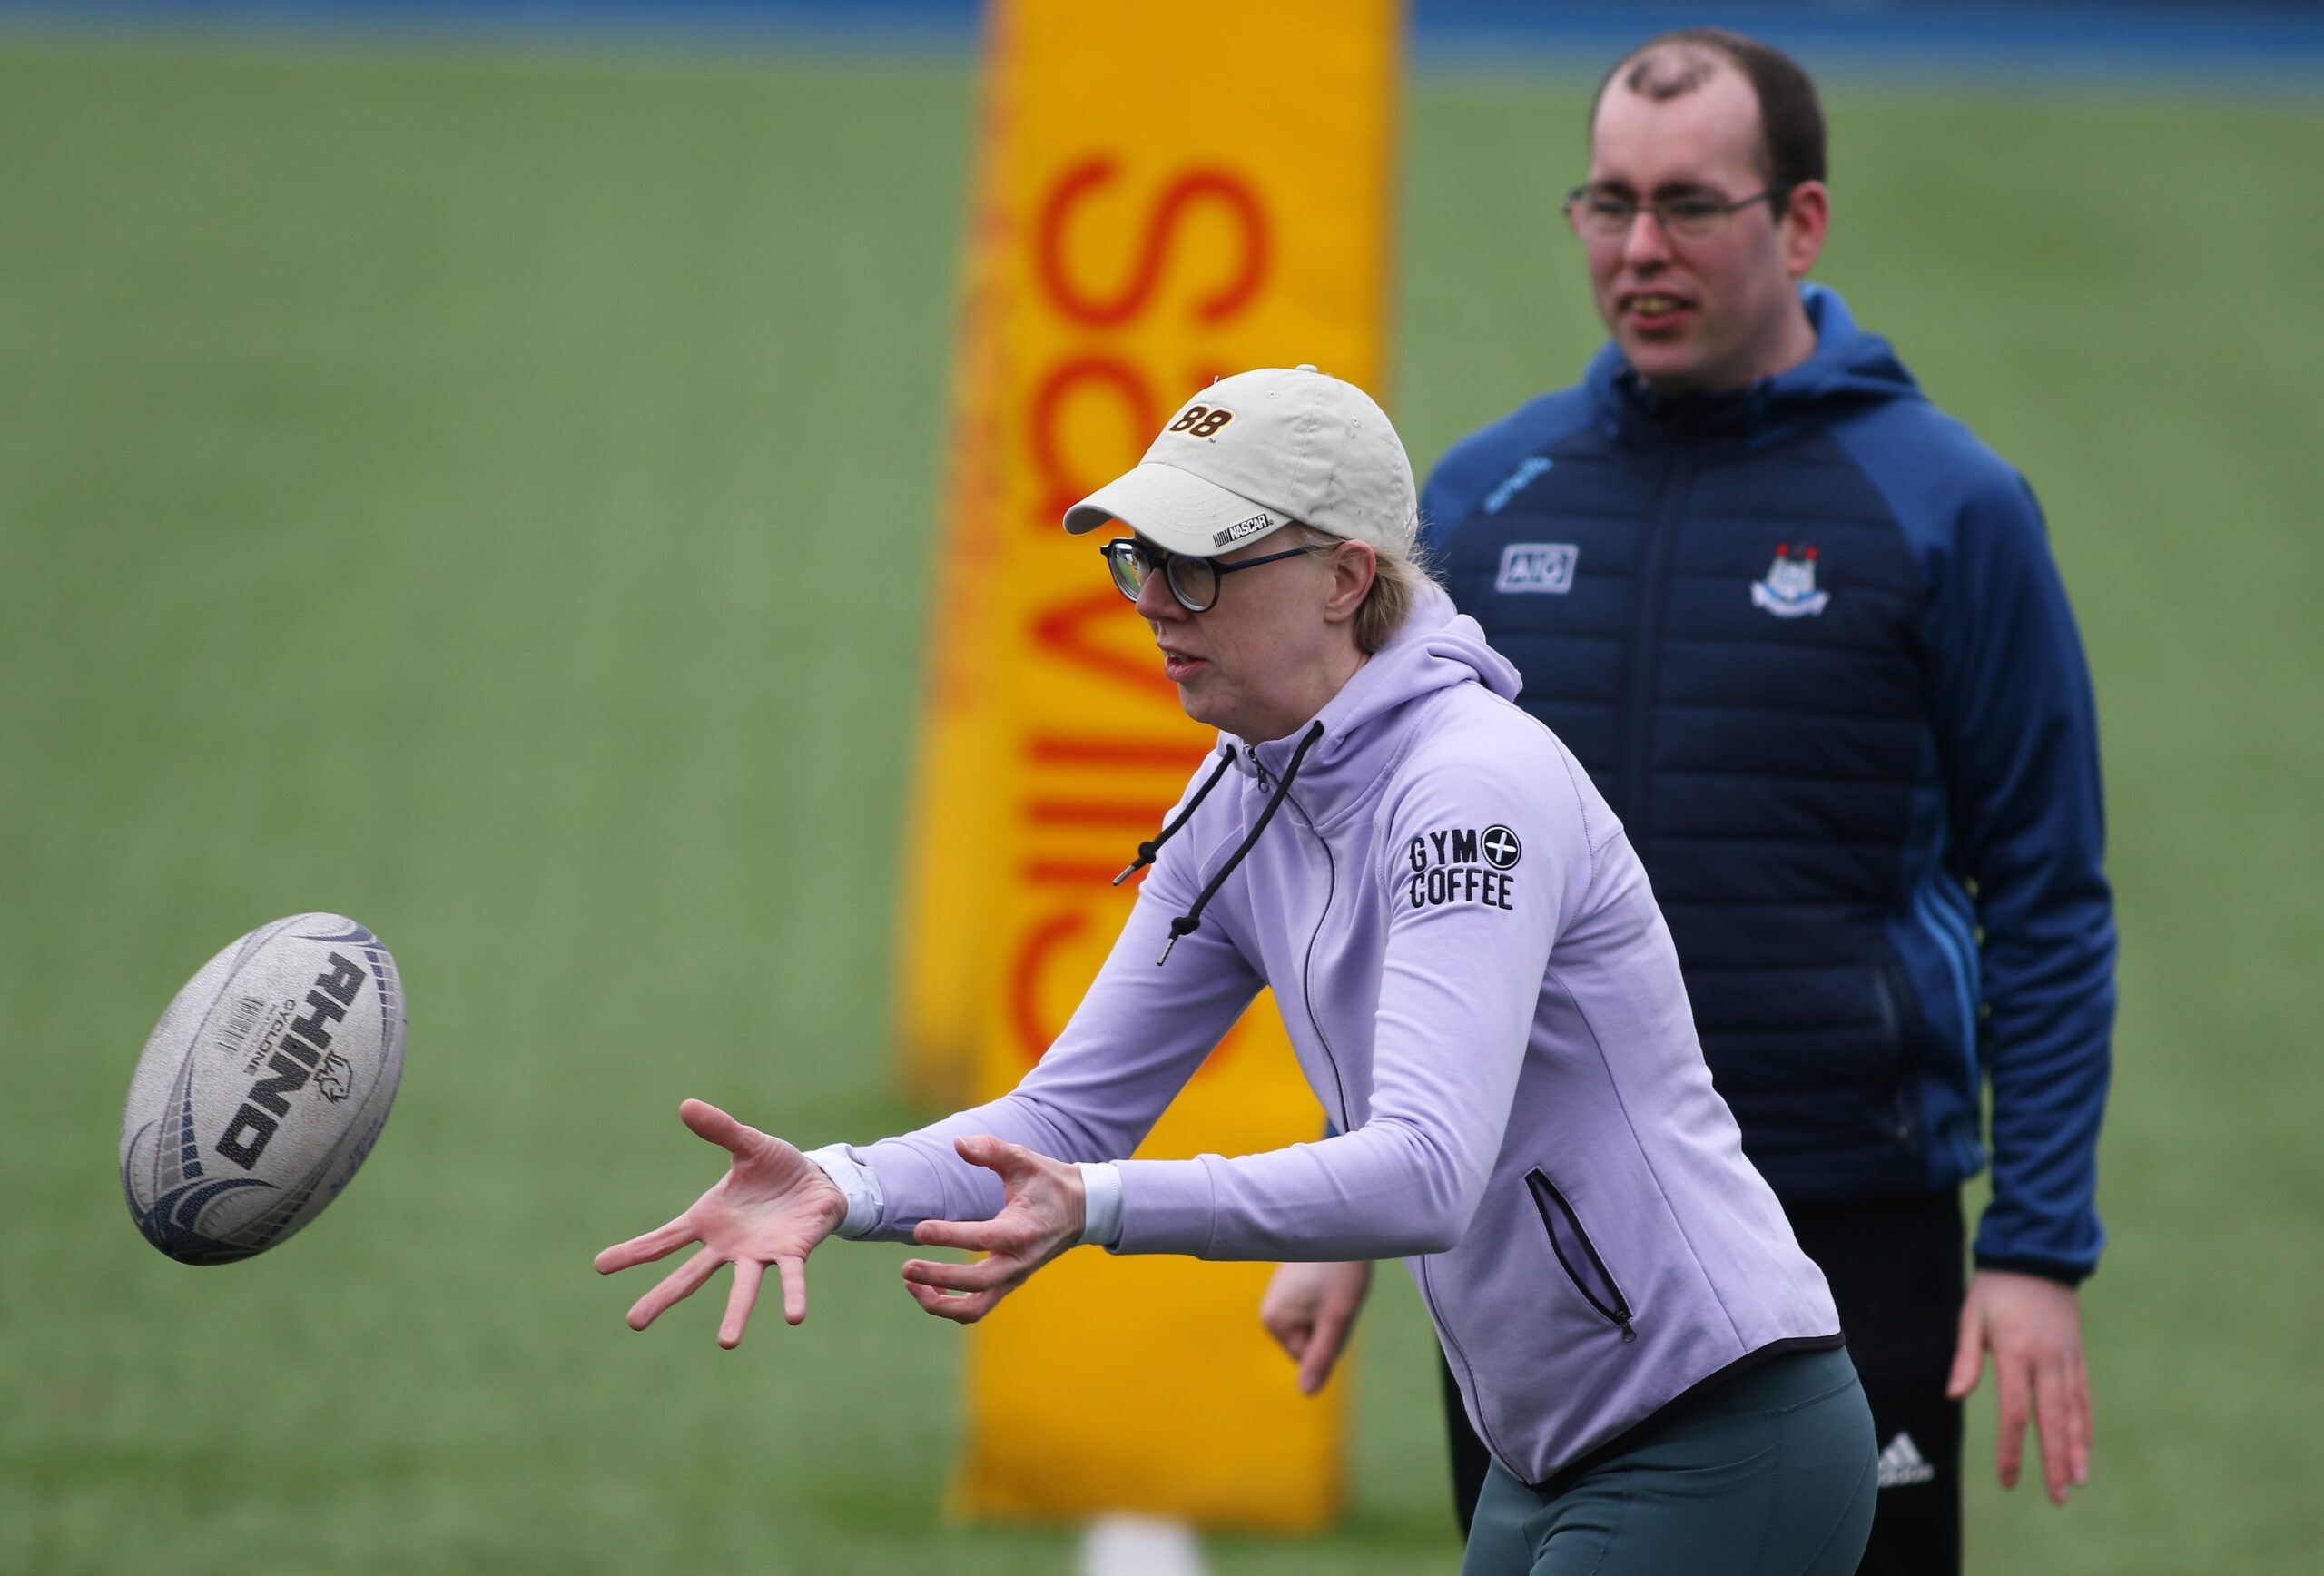 A man stands behind a woman who is wearing a cap and glasses who is about to catch a rugby ball which is coming toward her in a mid-air